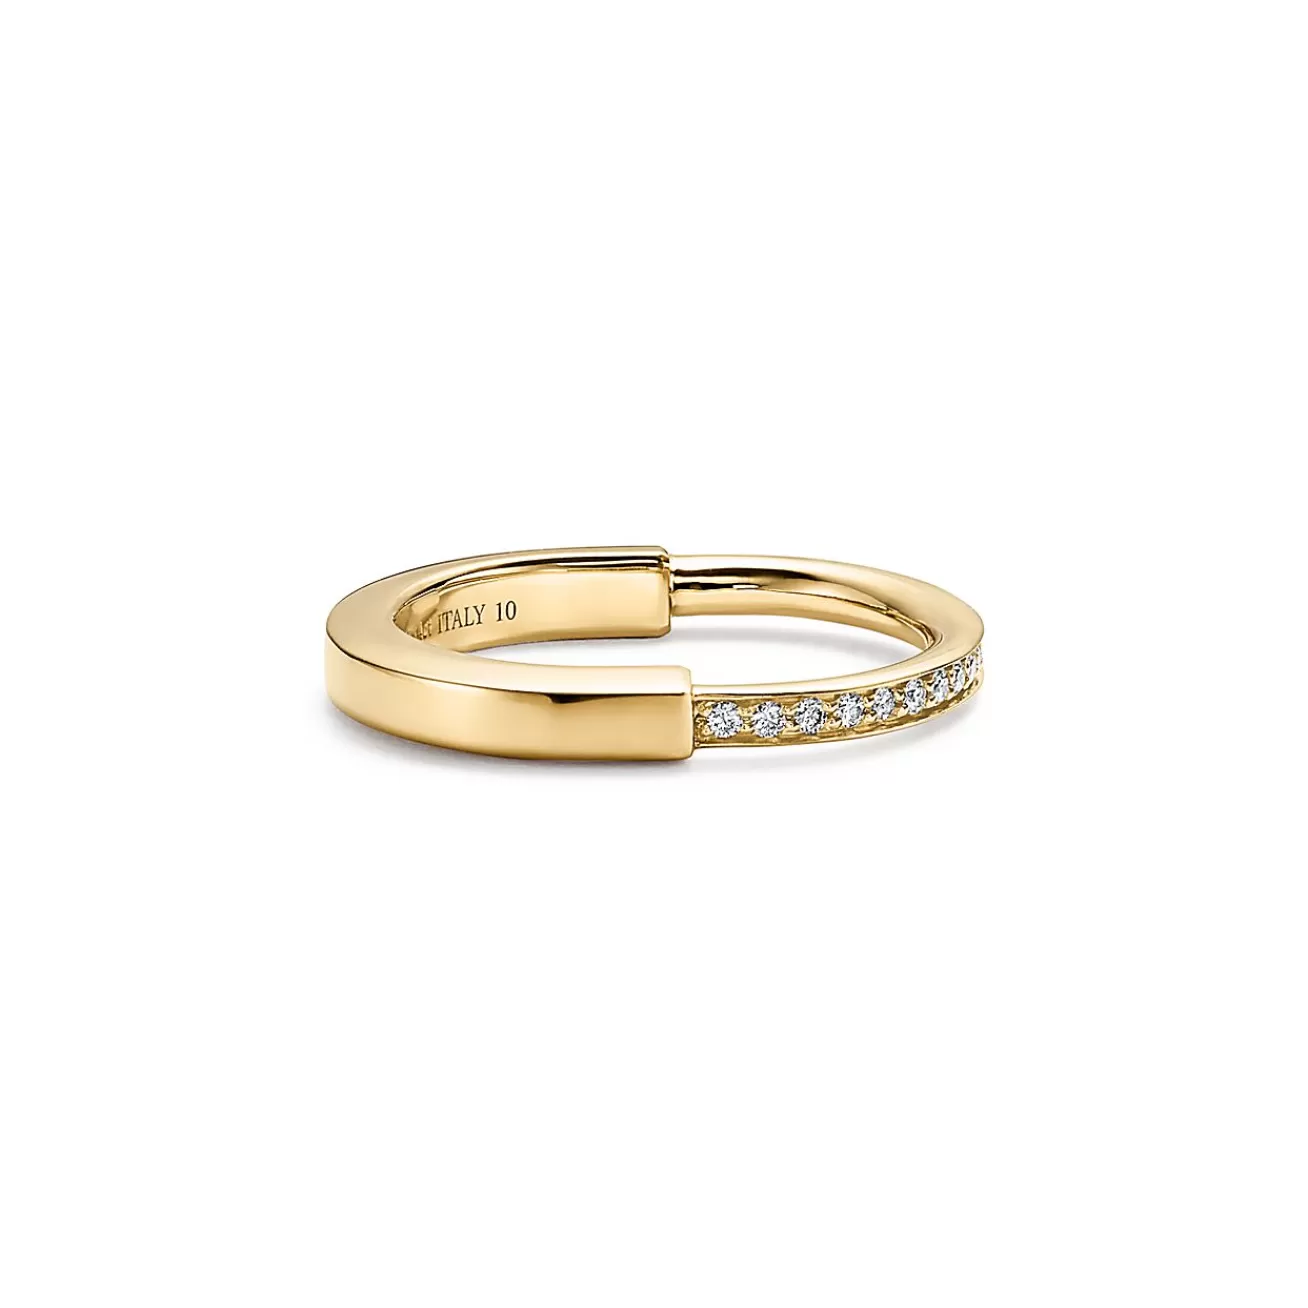 Tiffany & Co. Tiffany Lock Ring in Yellow Gold with Diamonds | ^ Rings | Gifts for Her